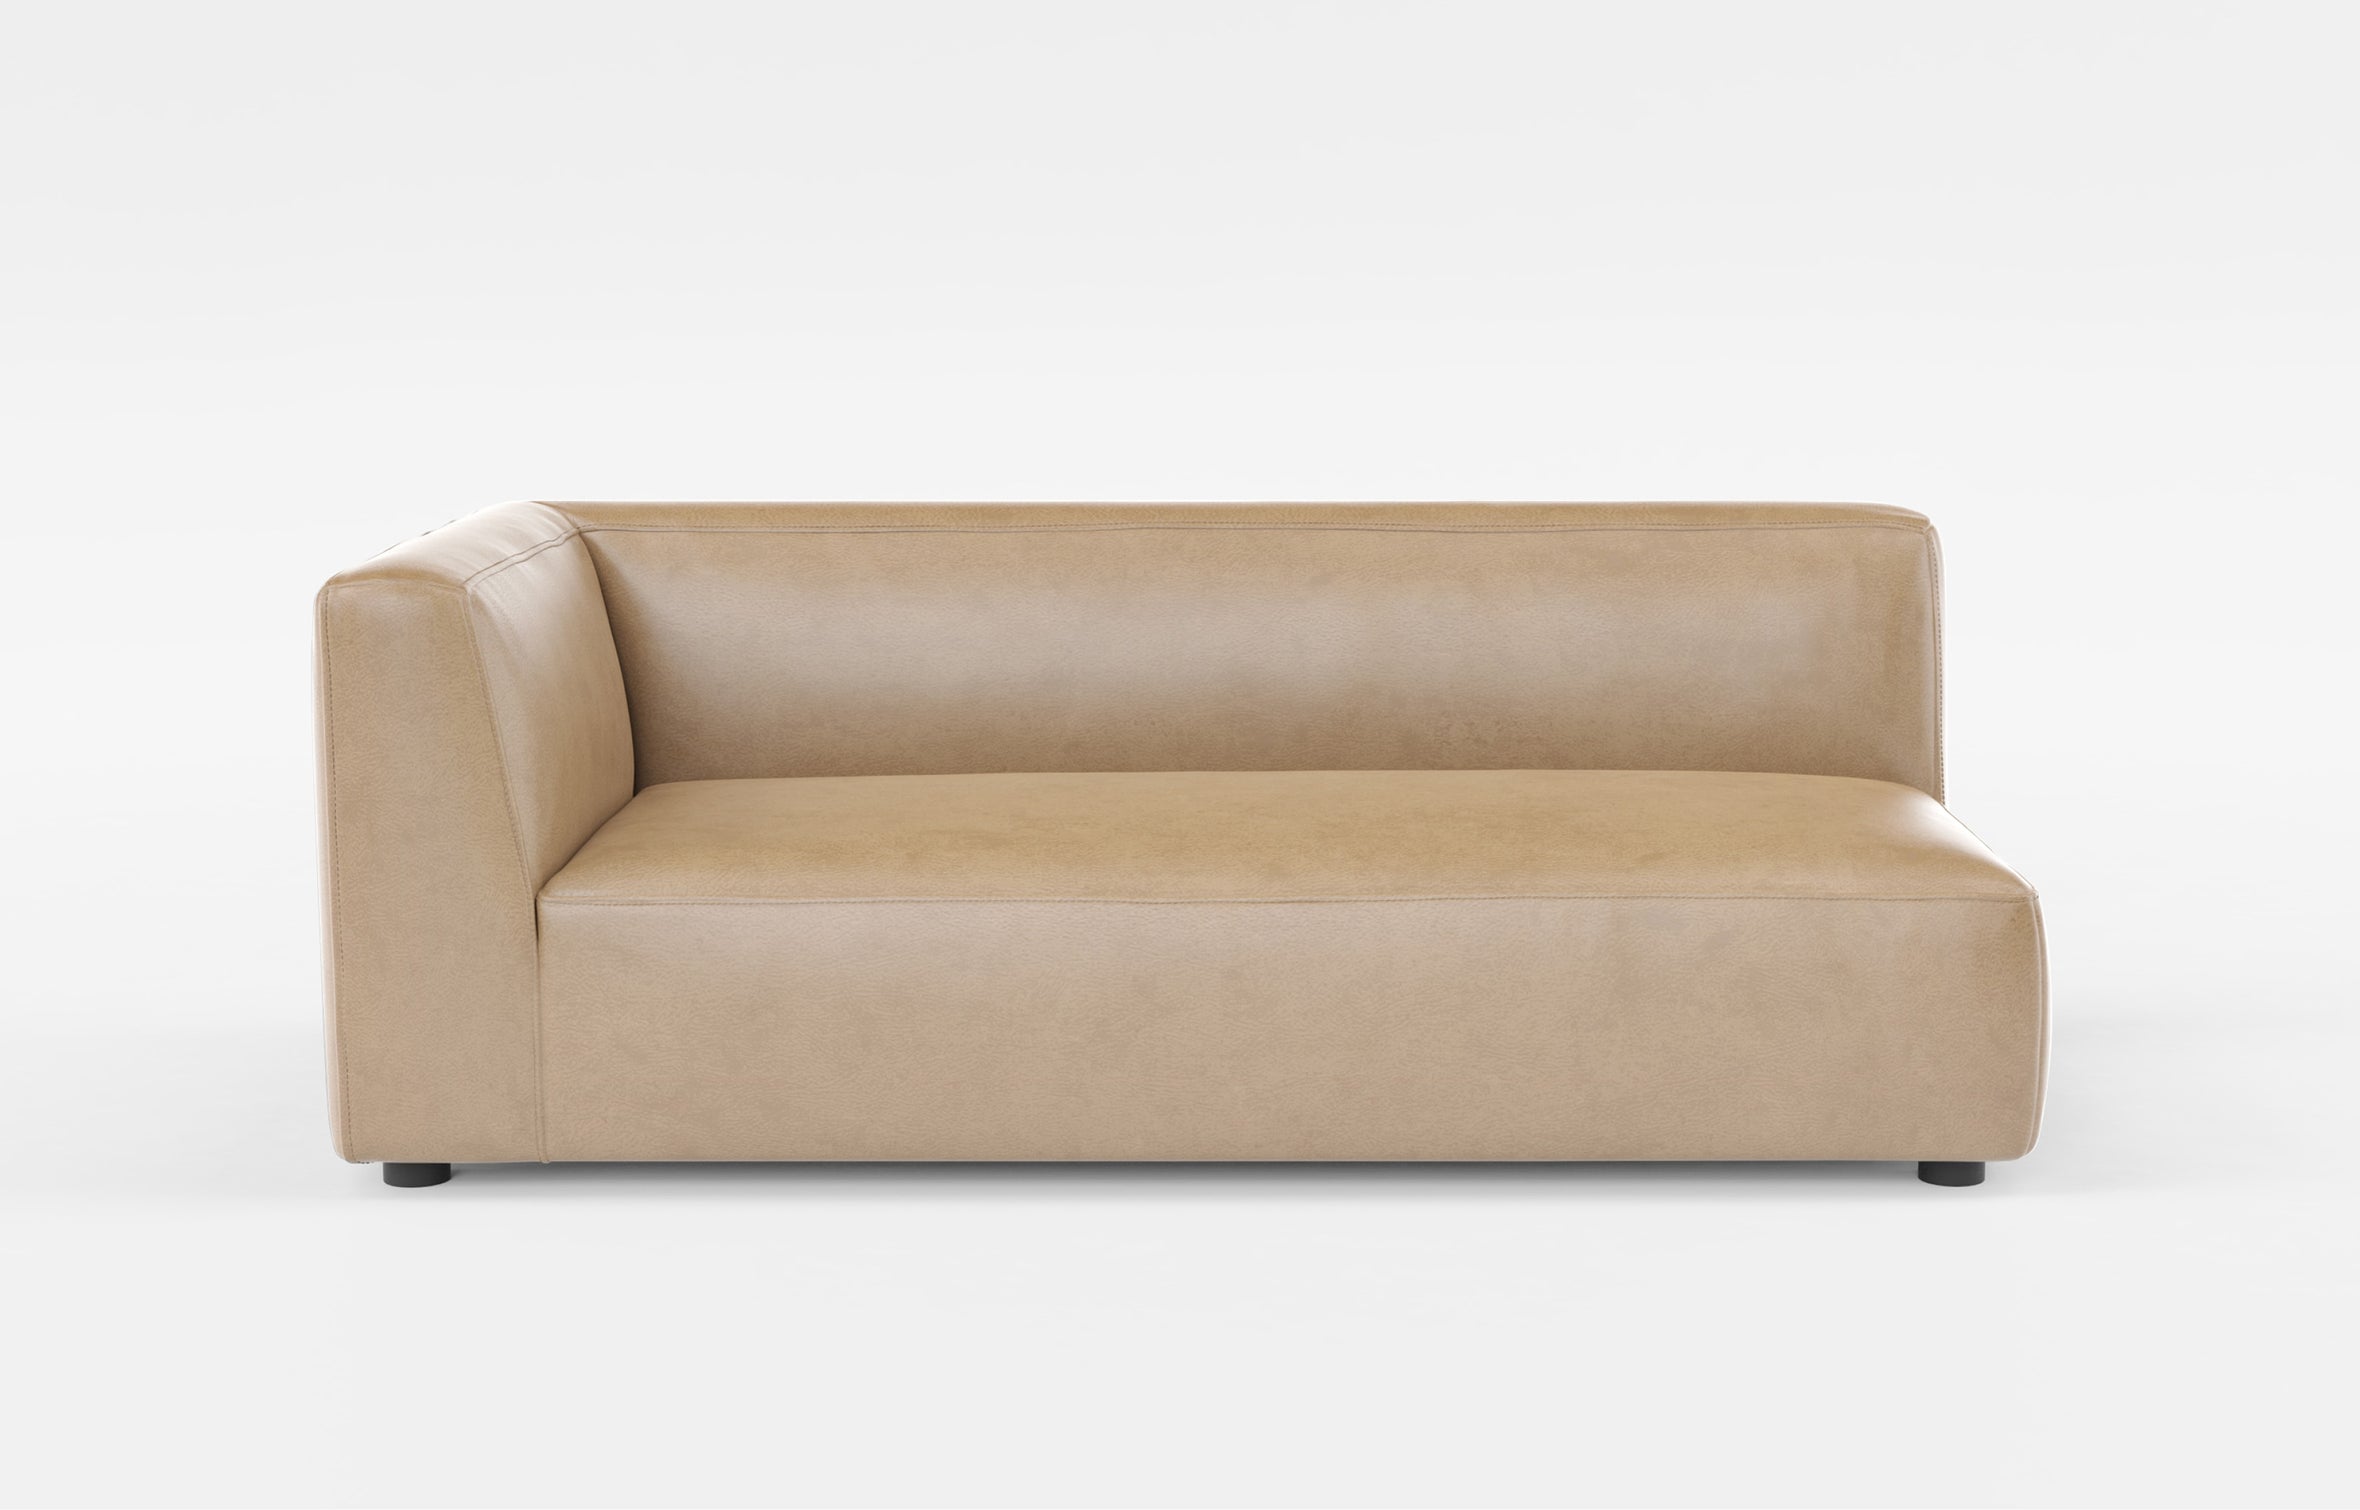 One arm || Bounce modular one arm sofa in light brown | ff&e dorm furniture manufacturers | Roomy | Chicago